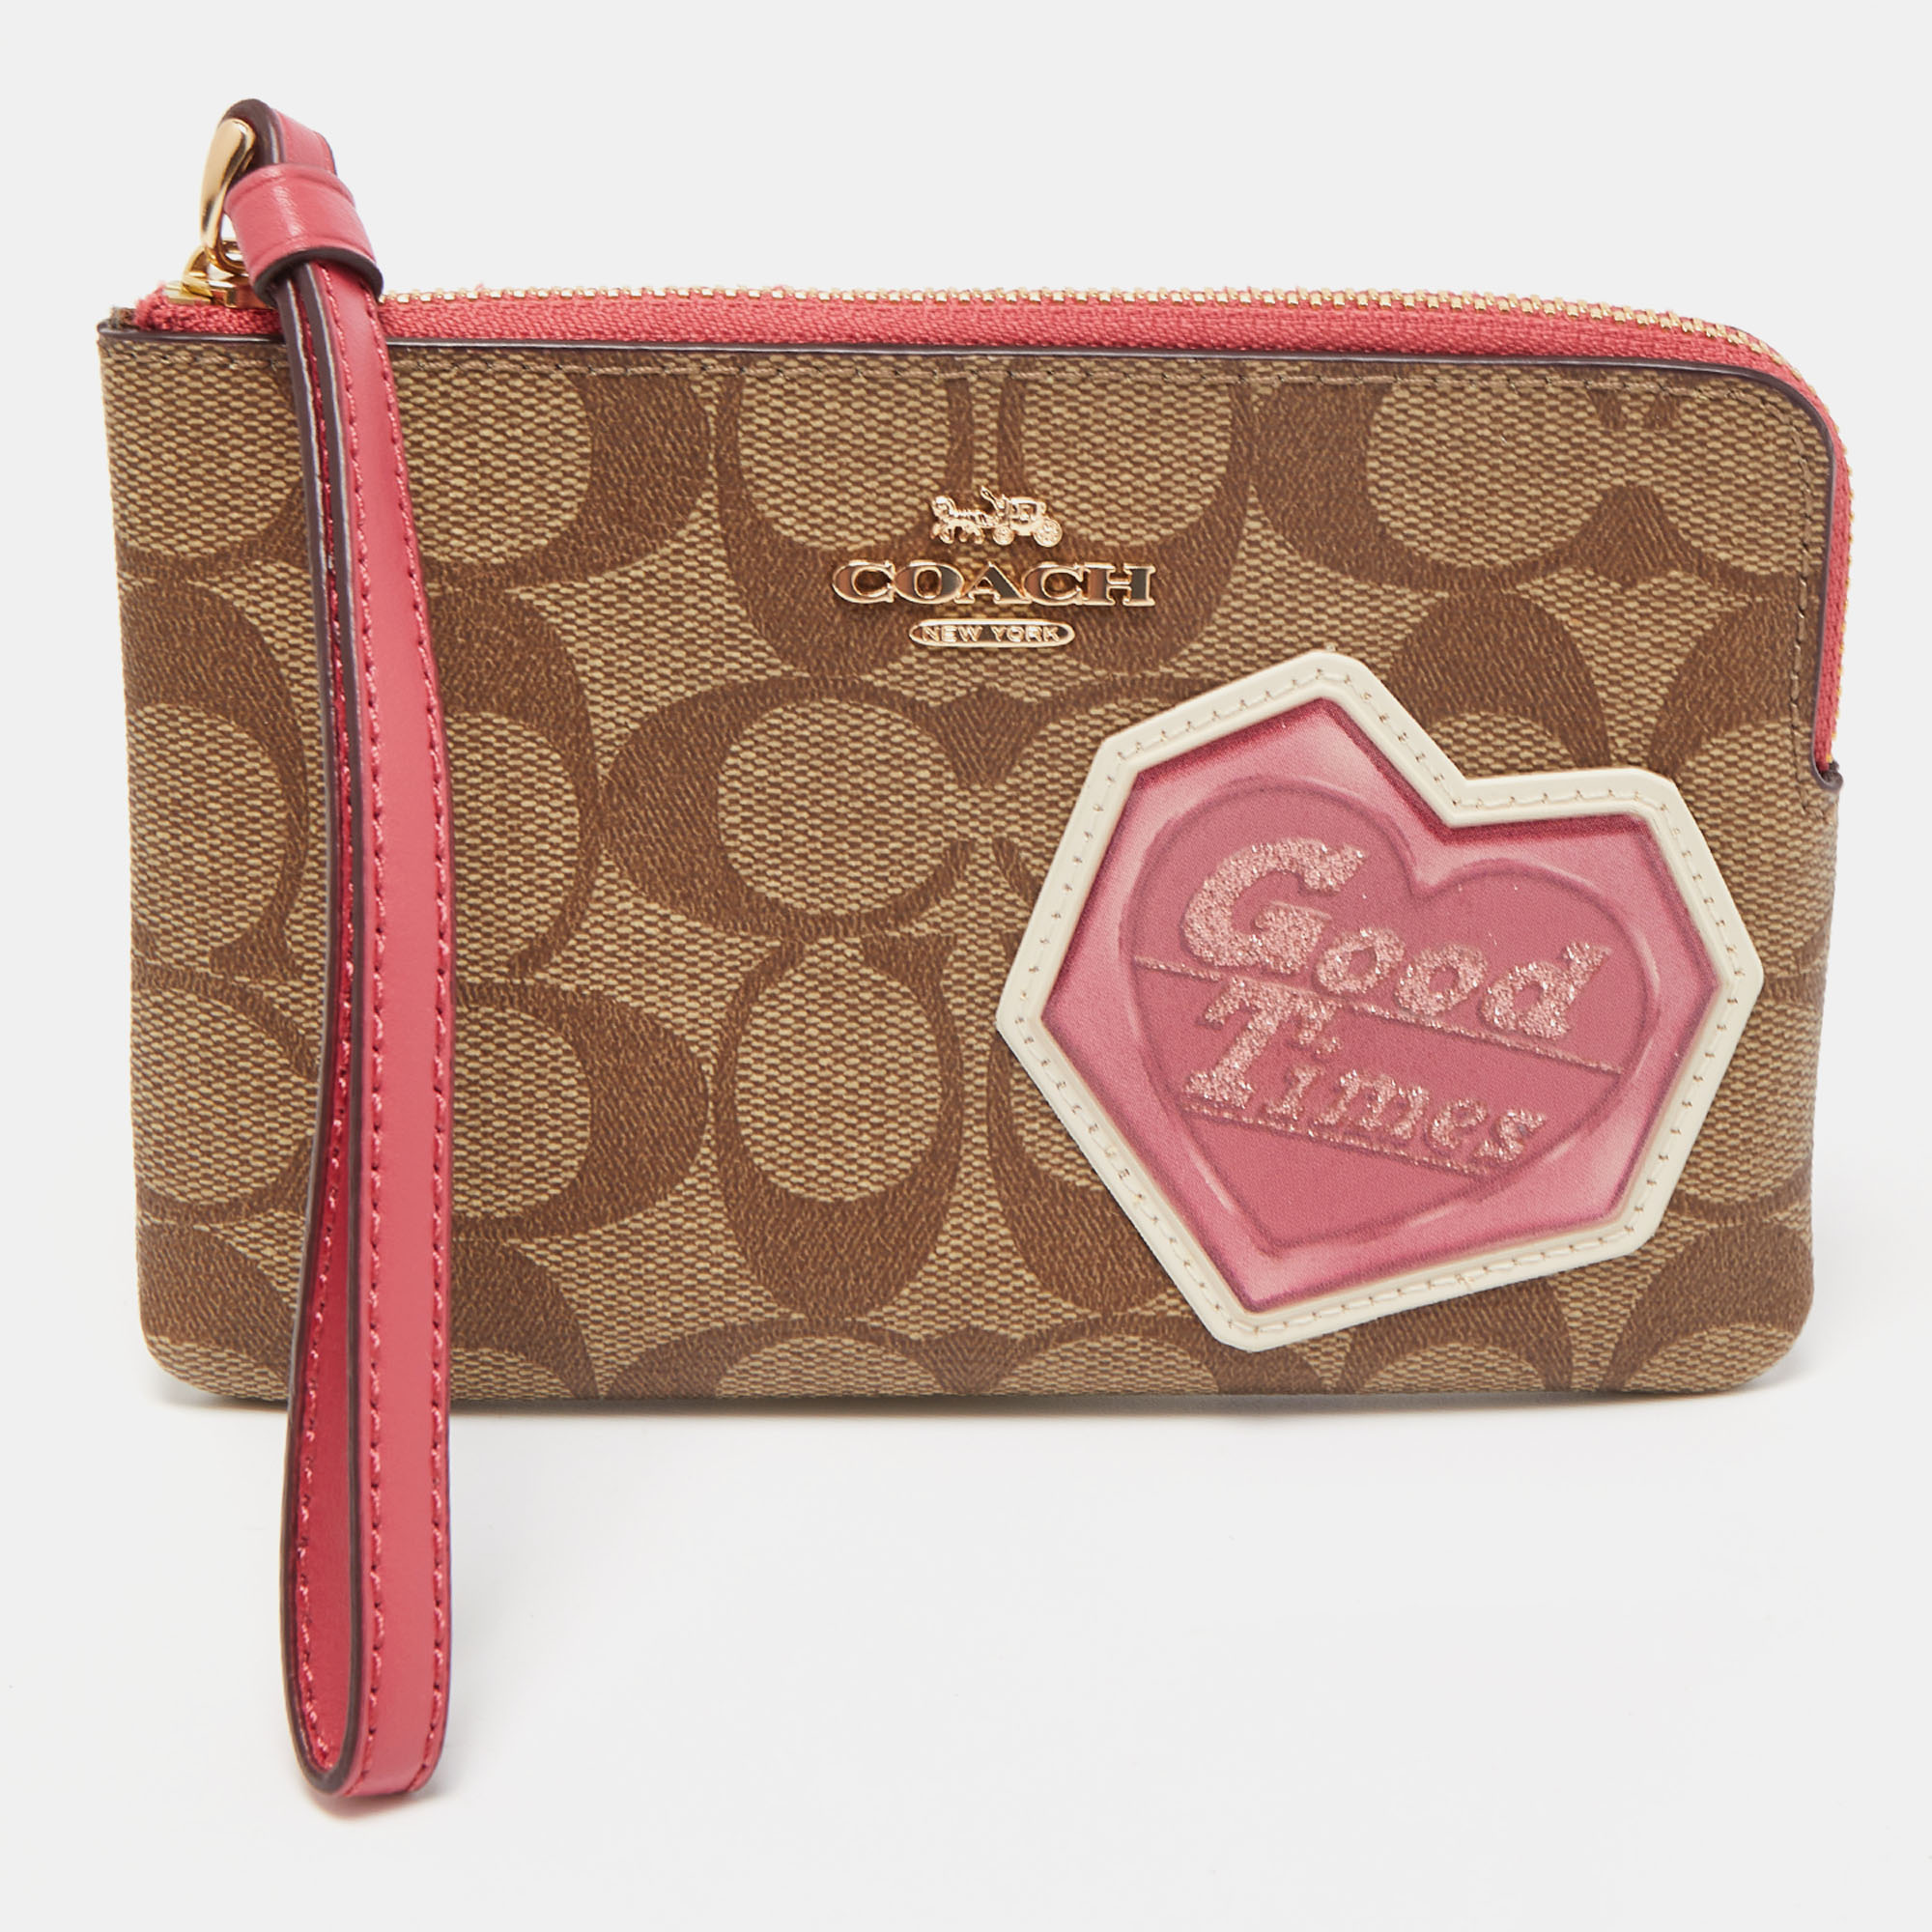 Coach beige/old rose signature coated canvas and leather disco patch wristlet pouch